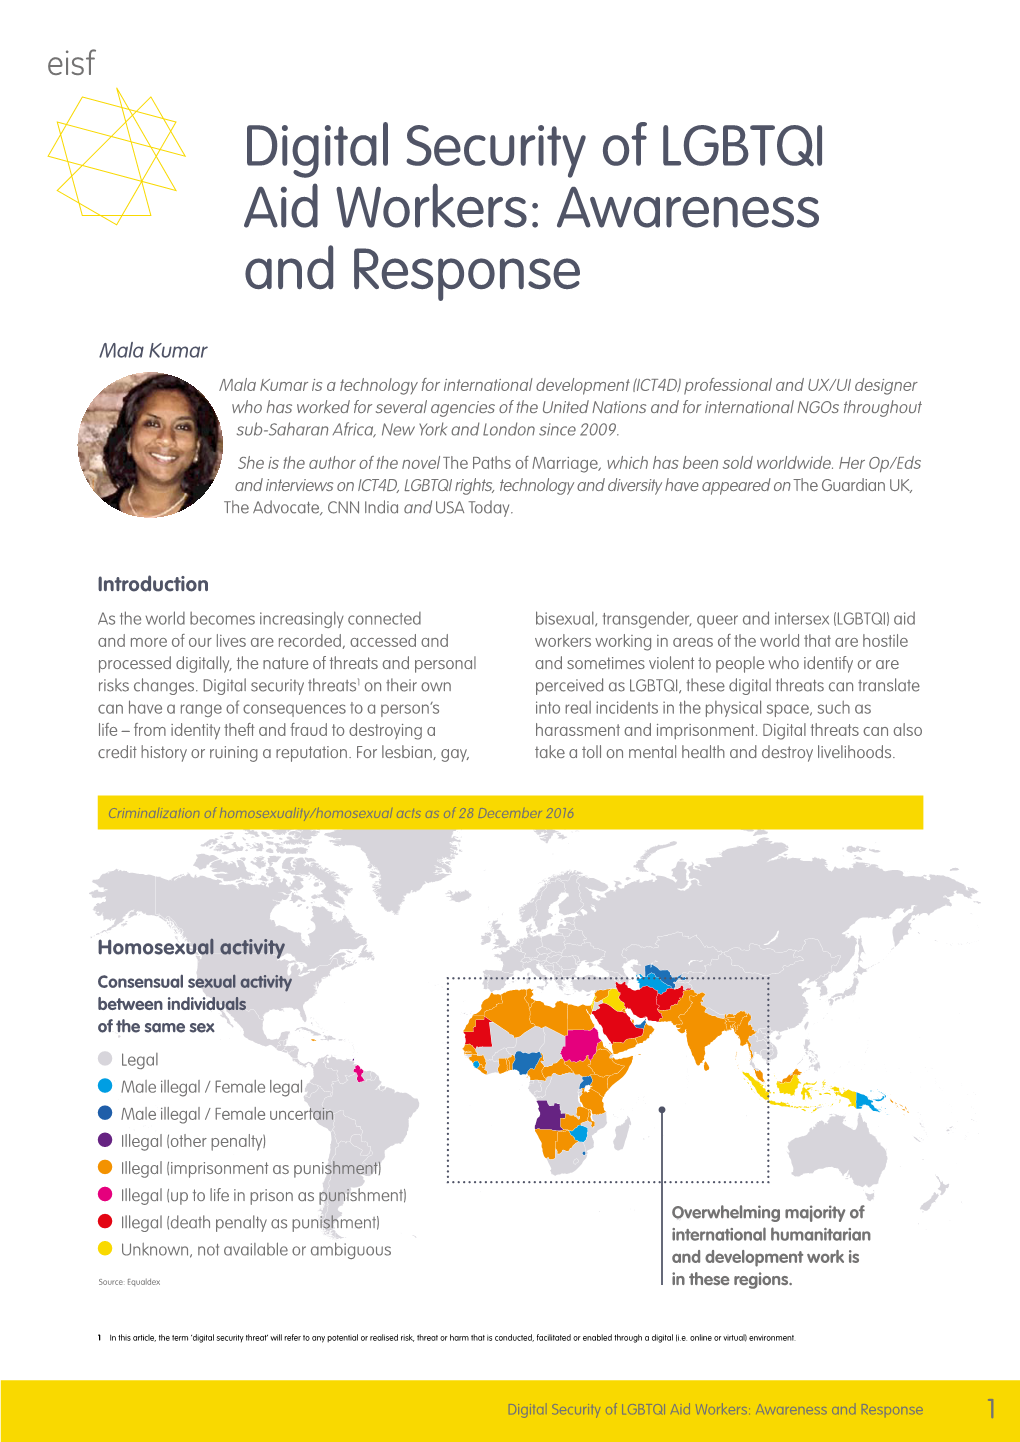 Digital Security of LGBTQI Aid Workers: Awareness and Response